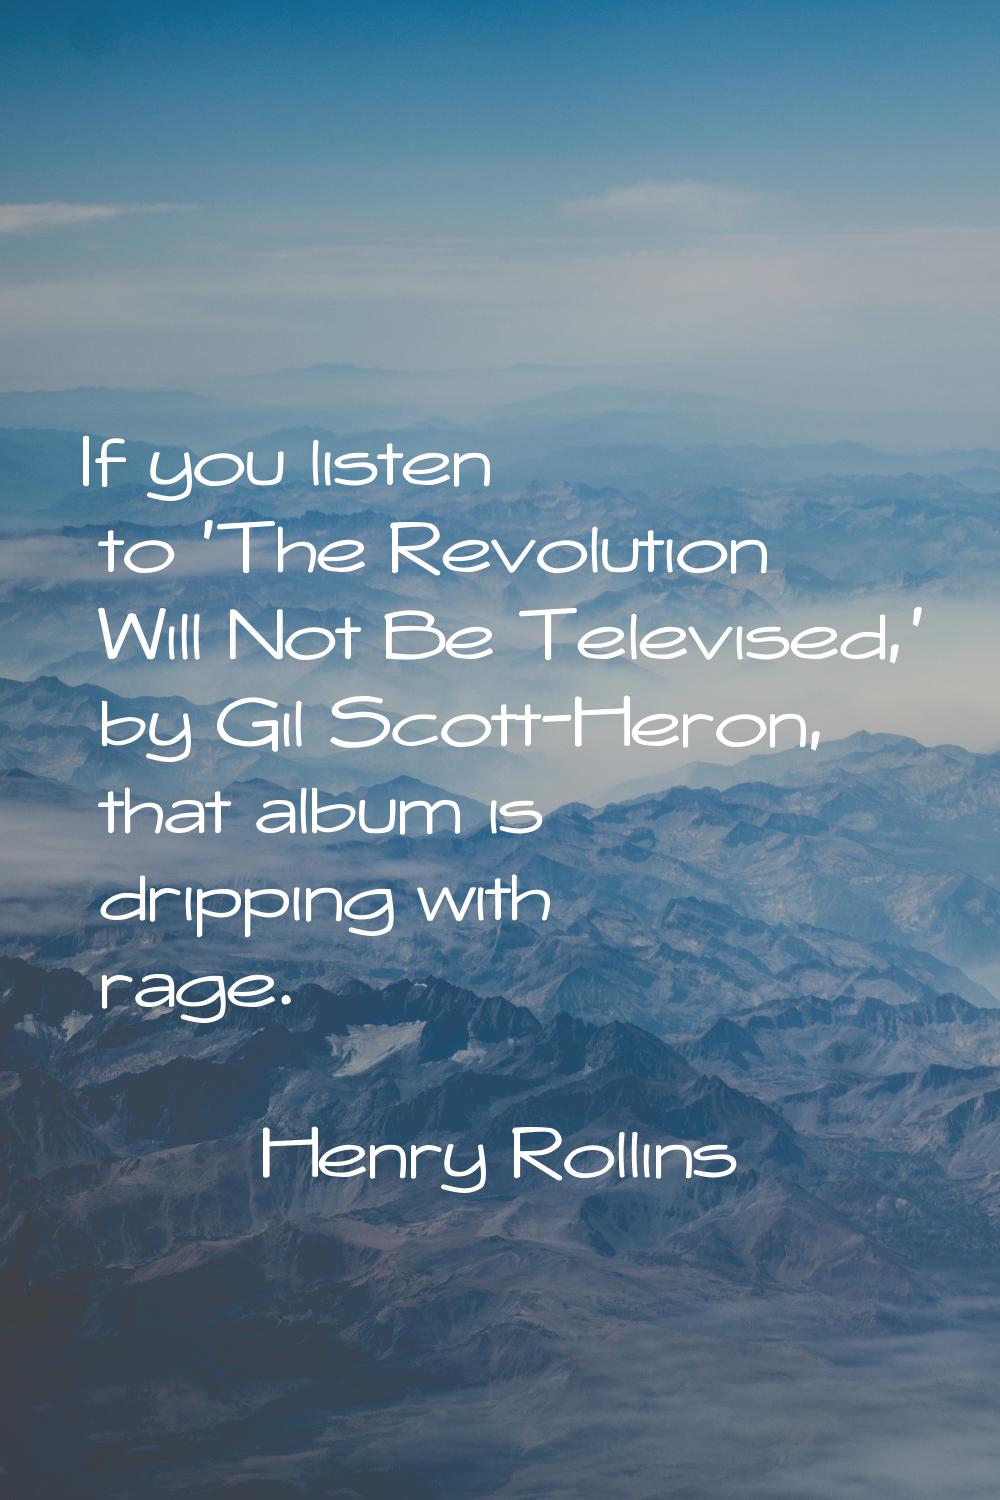 If you listen to 'The Revolution Will Not Be Televised,' by Gil Scott-Heron, that album is dripping